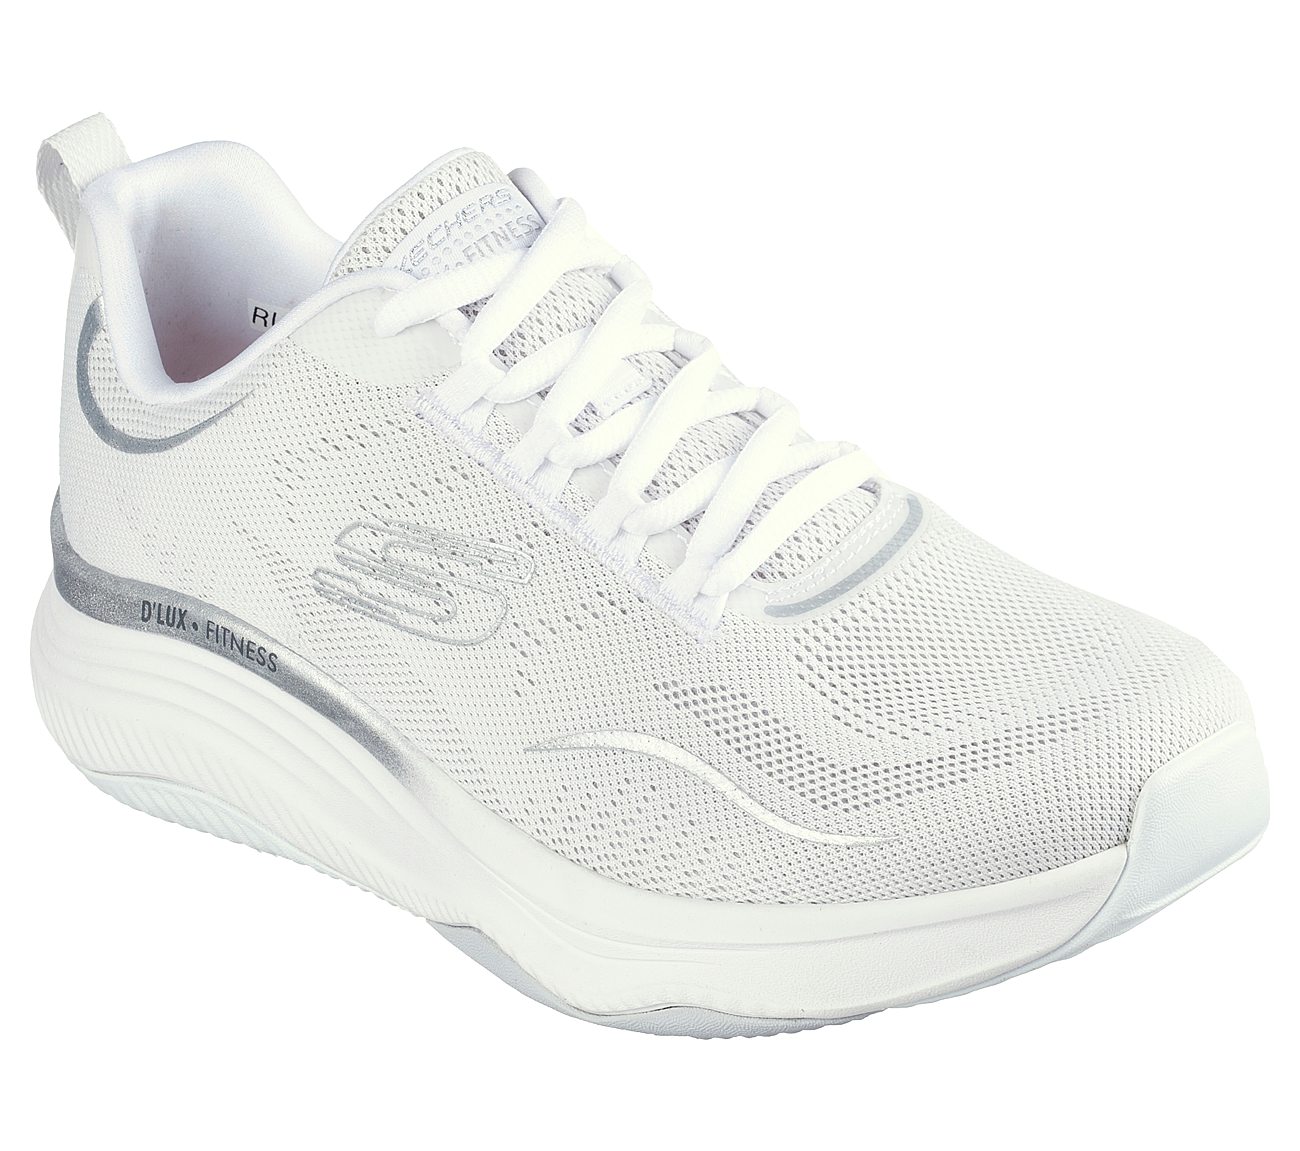 D'LUX FITNESS-PURE GLAM, WHITE/SILVER Footwear Right View